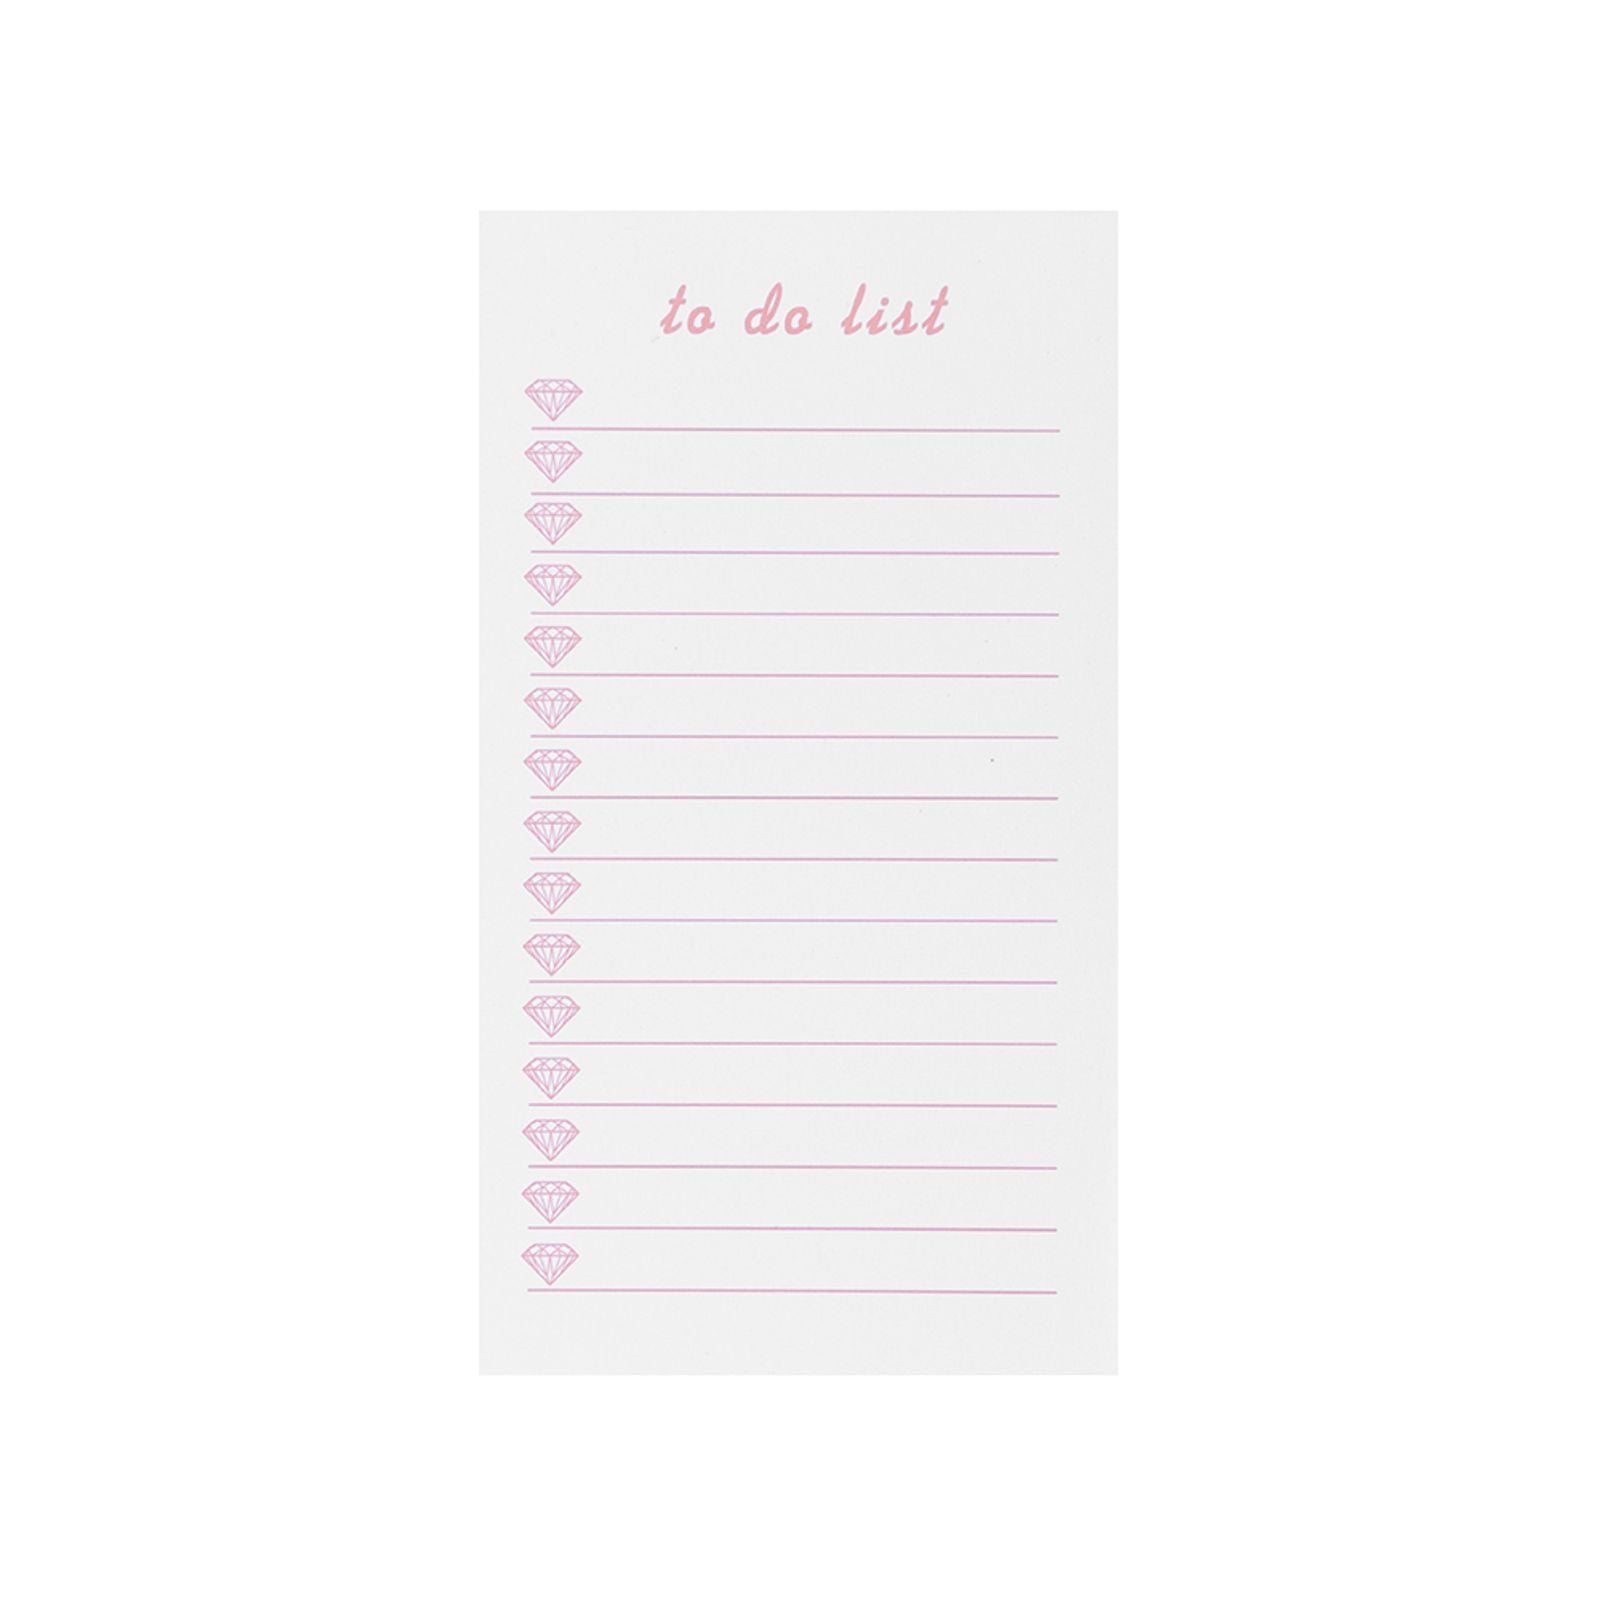 MINISO ROSE GOLD SERIES NOTE PAD ( 60 SHEETS ) PDQ 2015286110105 STATIONERY & GIFT